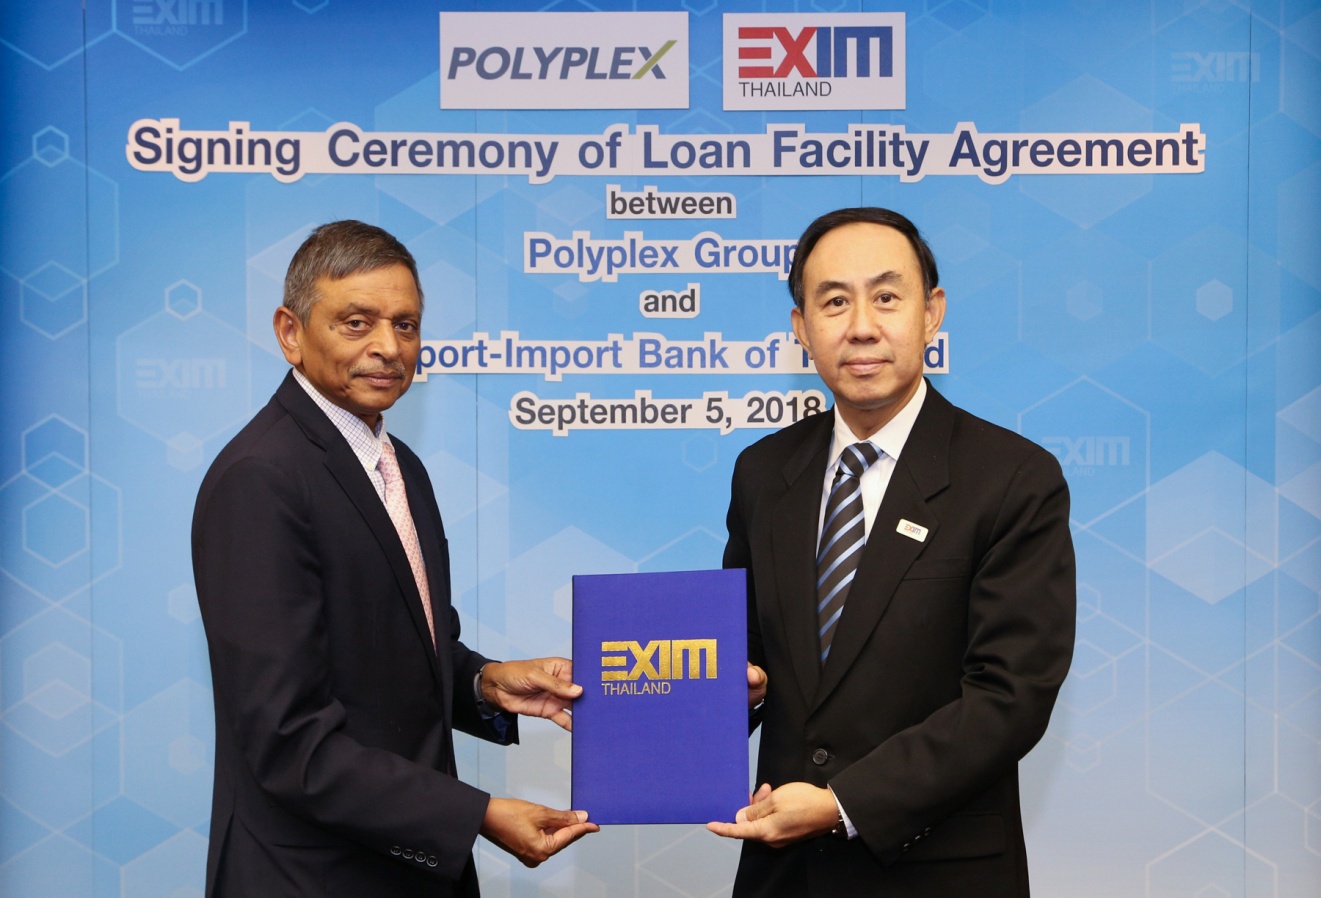 EXIM Thailand Finances Polyplex Group’s Construction of New PET Film Plant in Indonesia